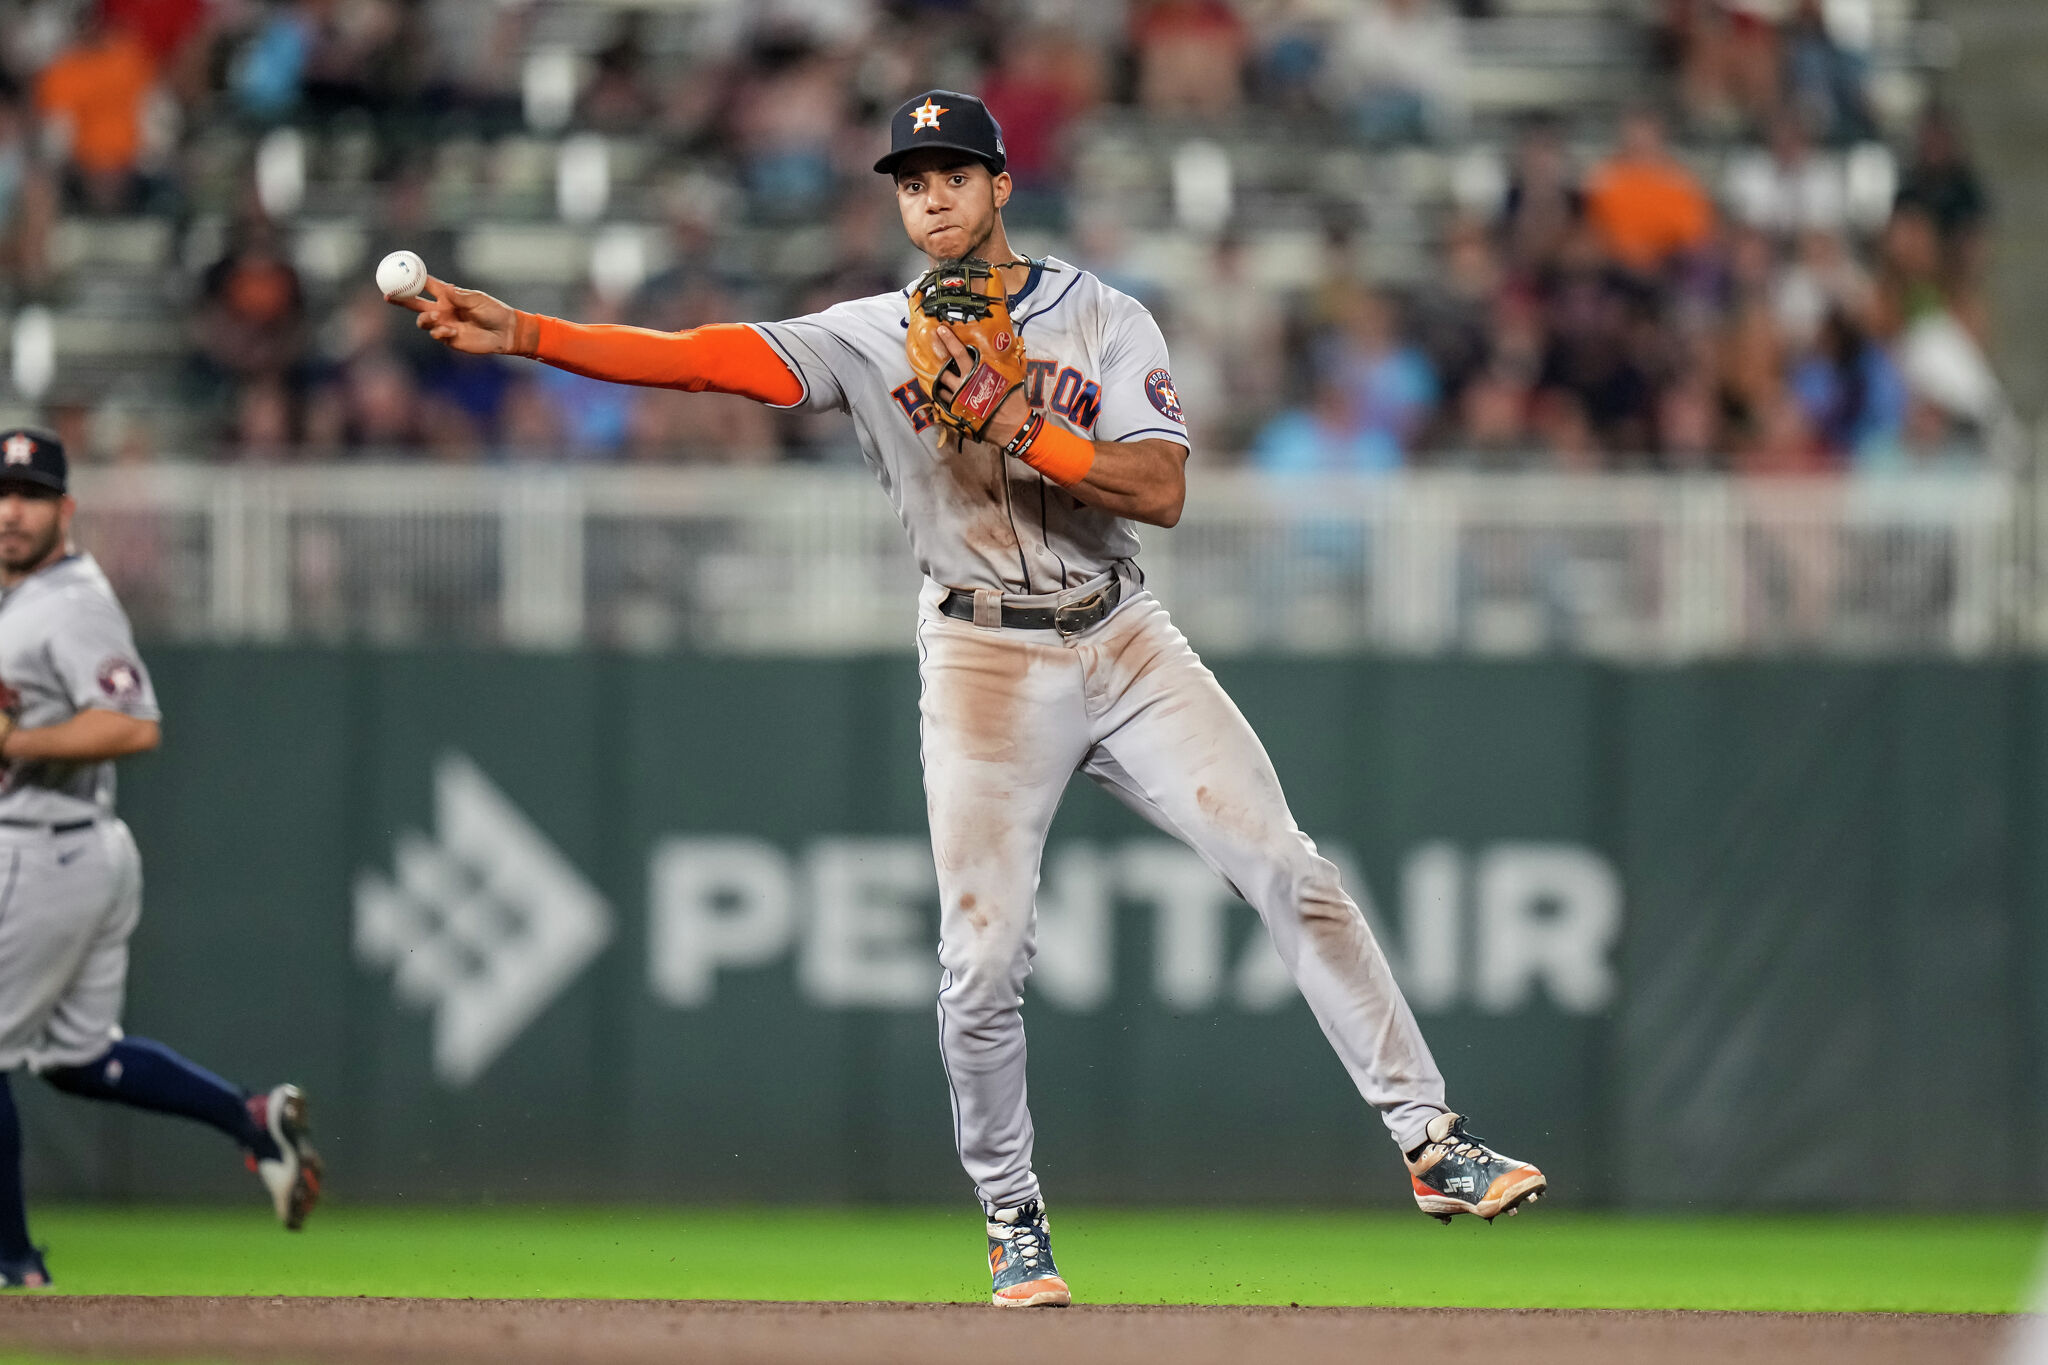 Astros players up for top defensive honor